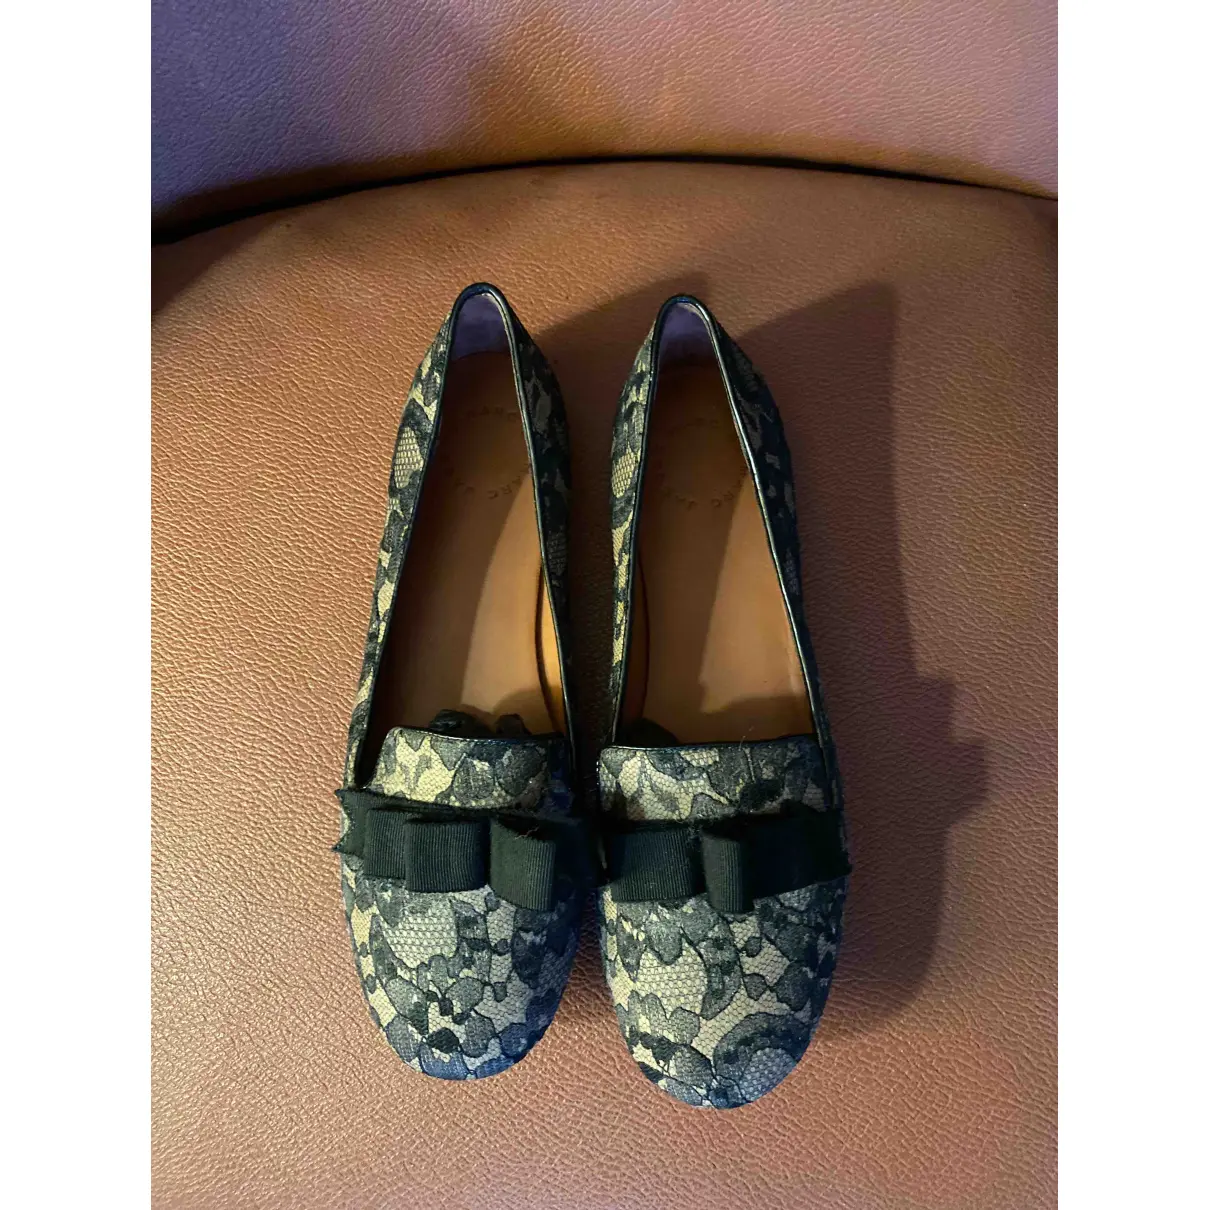 Buy Marc by Marc Jacobs Cloth ballet flats online